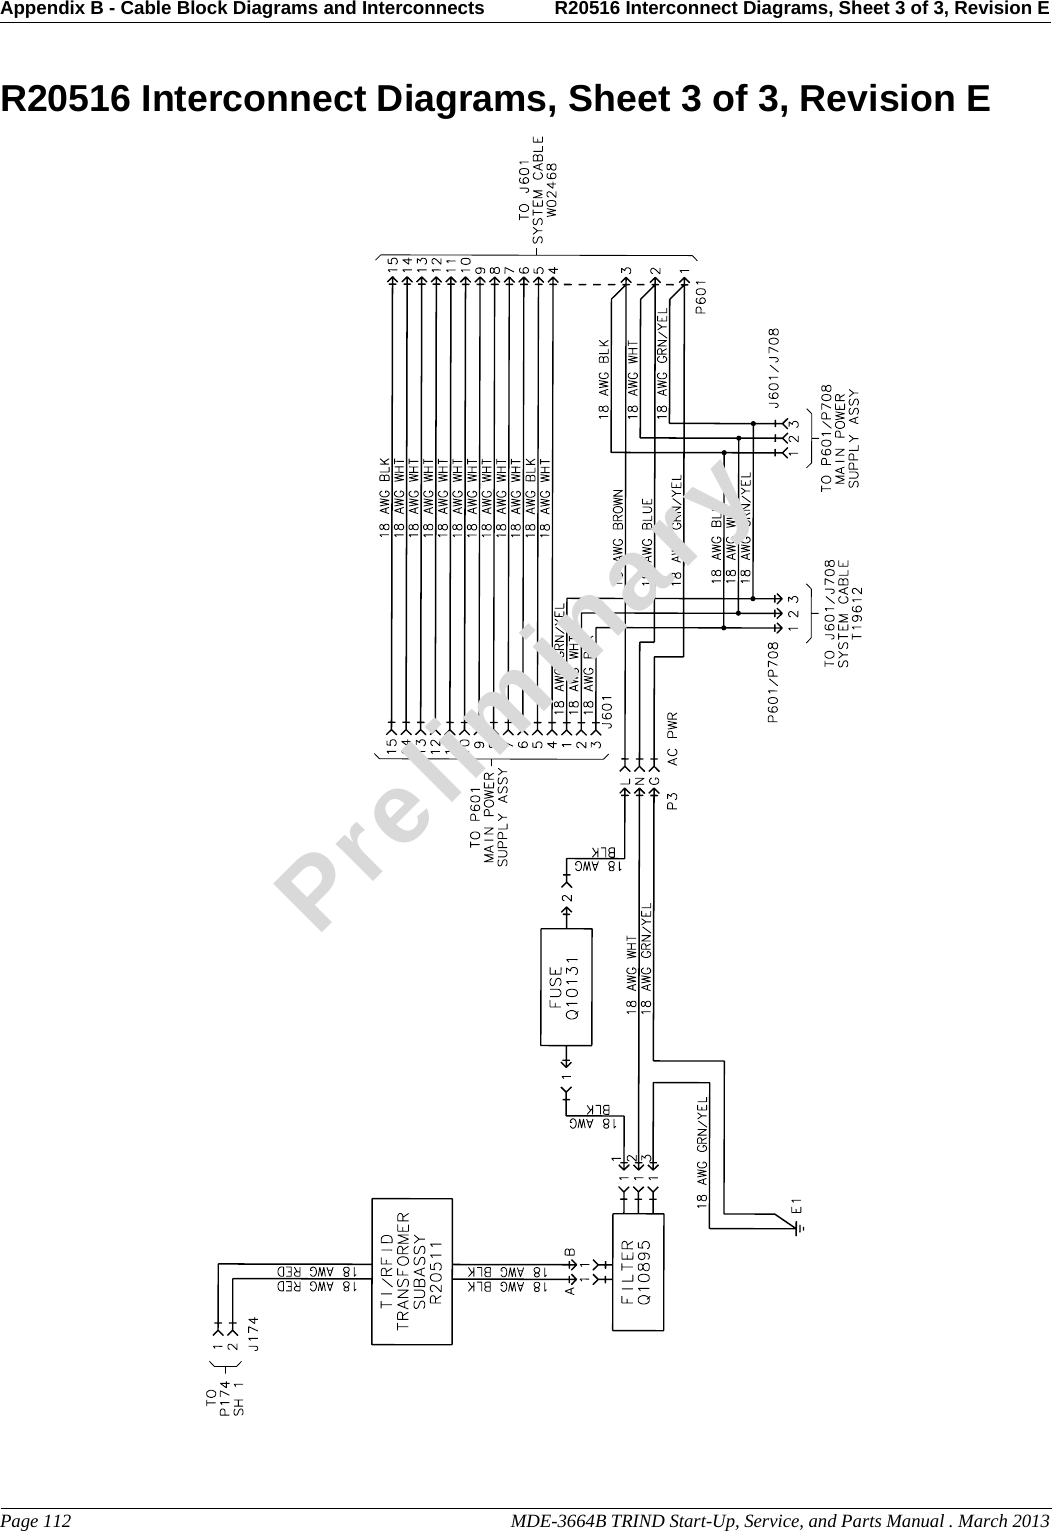 Appendix B - Cable Block Diagrams and Interconnects R20516 Interconnect Diagrams, Sheet 3 of 3, Revision EPage 112                                                                                                  MDE-3664B TRIND Start-Up, Service, and Parts Manual . March 2013PreliminaryR20516 Interconnect Diagrams, Sheet 3 of 3, Revision E